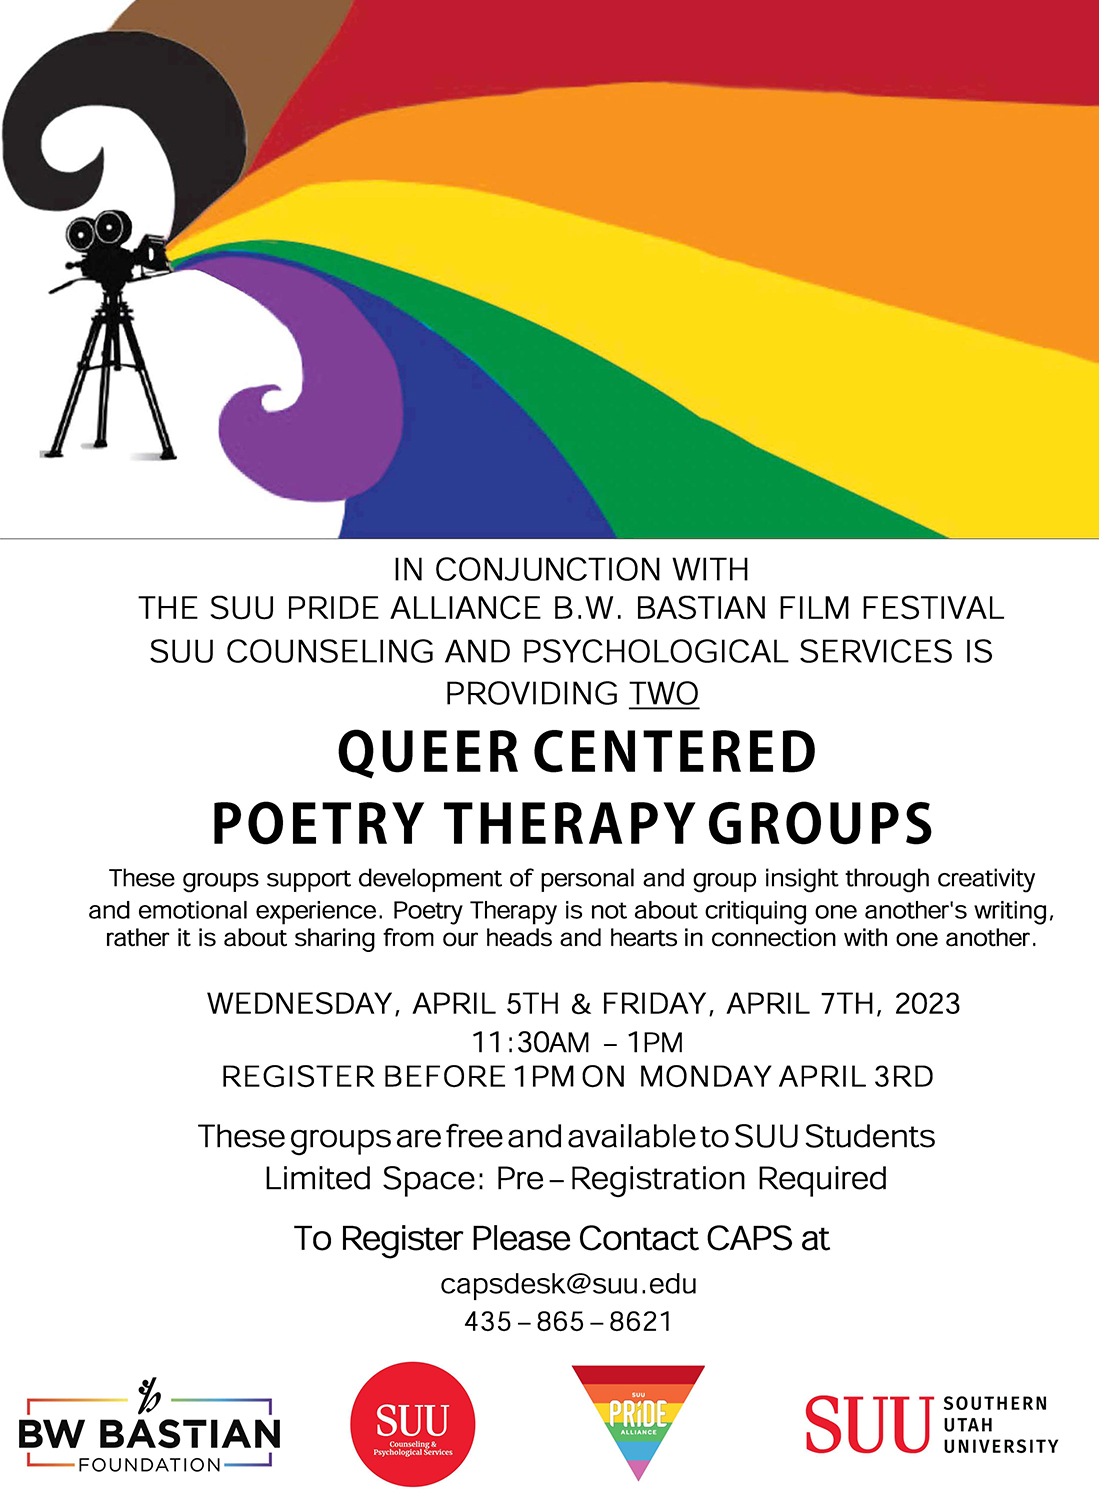 poetry therapy groups schedule